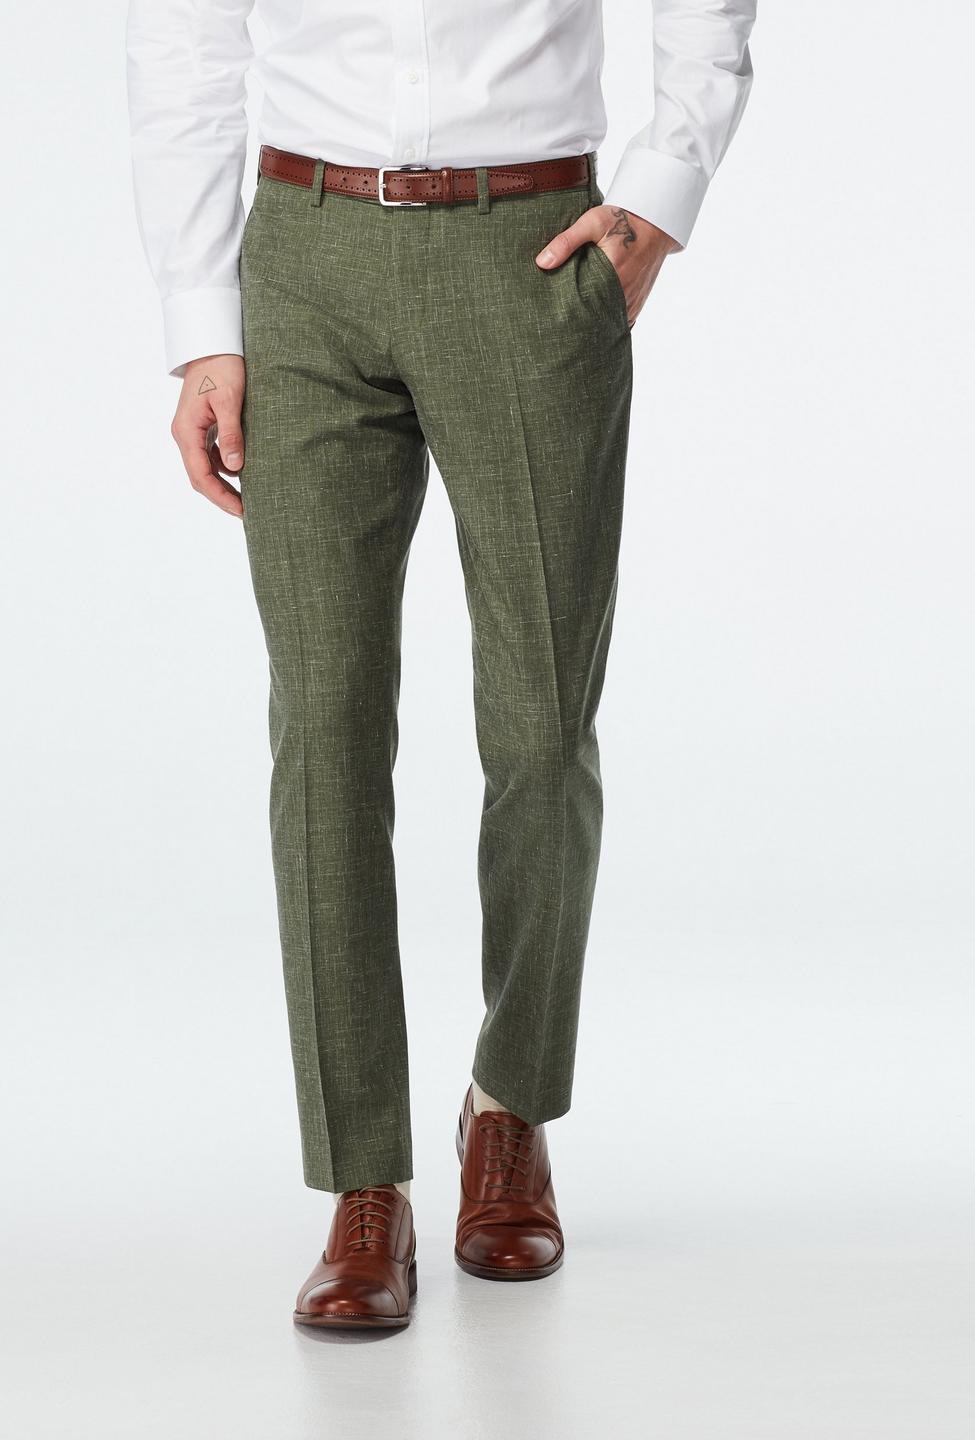 Green pants - Stockport Solid Design from Seasonal Indochino Collection